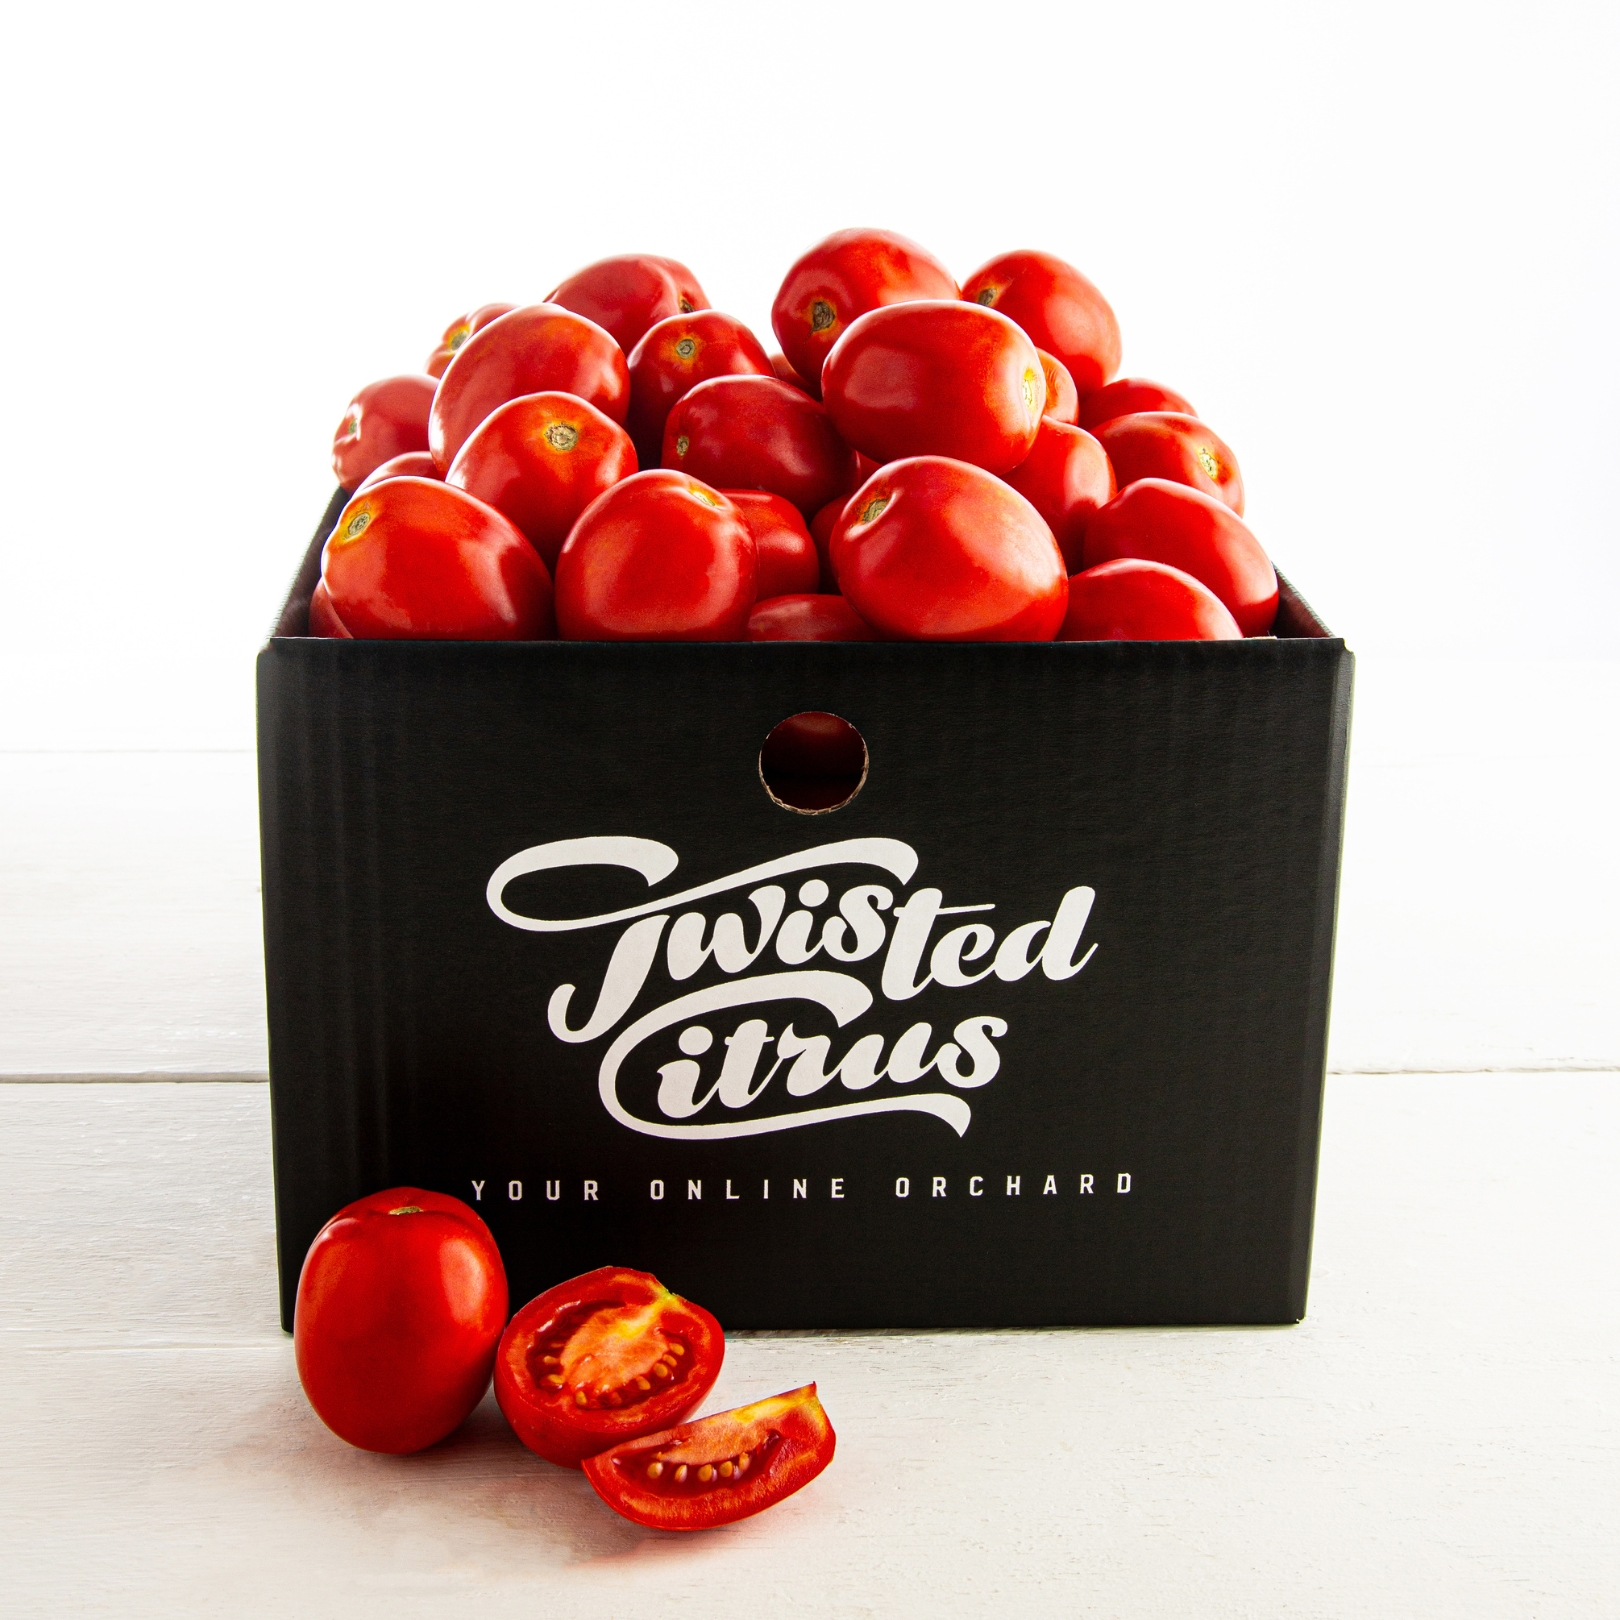 Buy Tomatoes - Roma Online NZ - Twisted Citrus